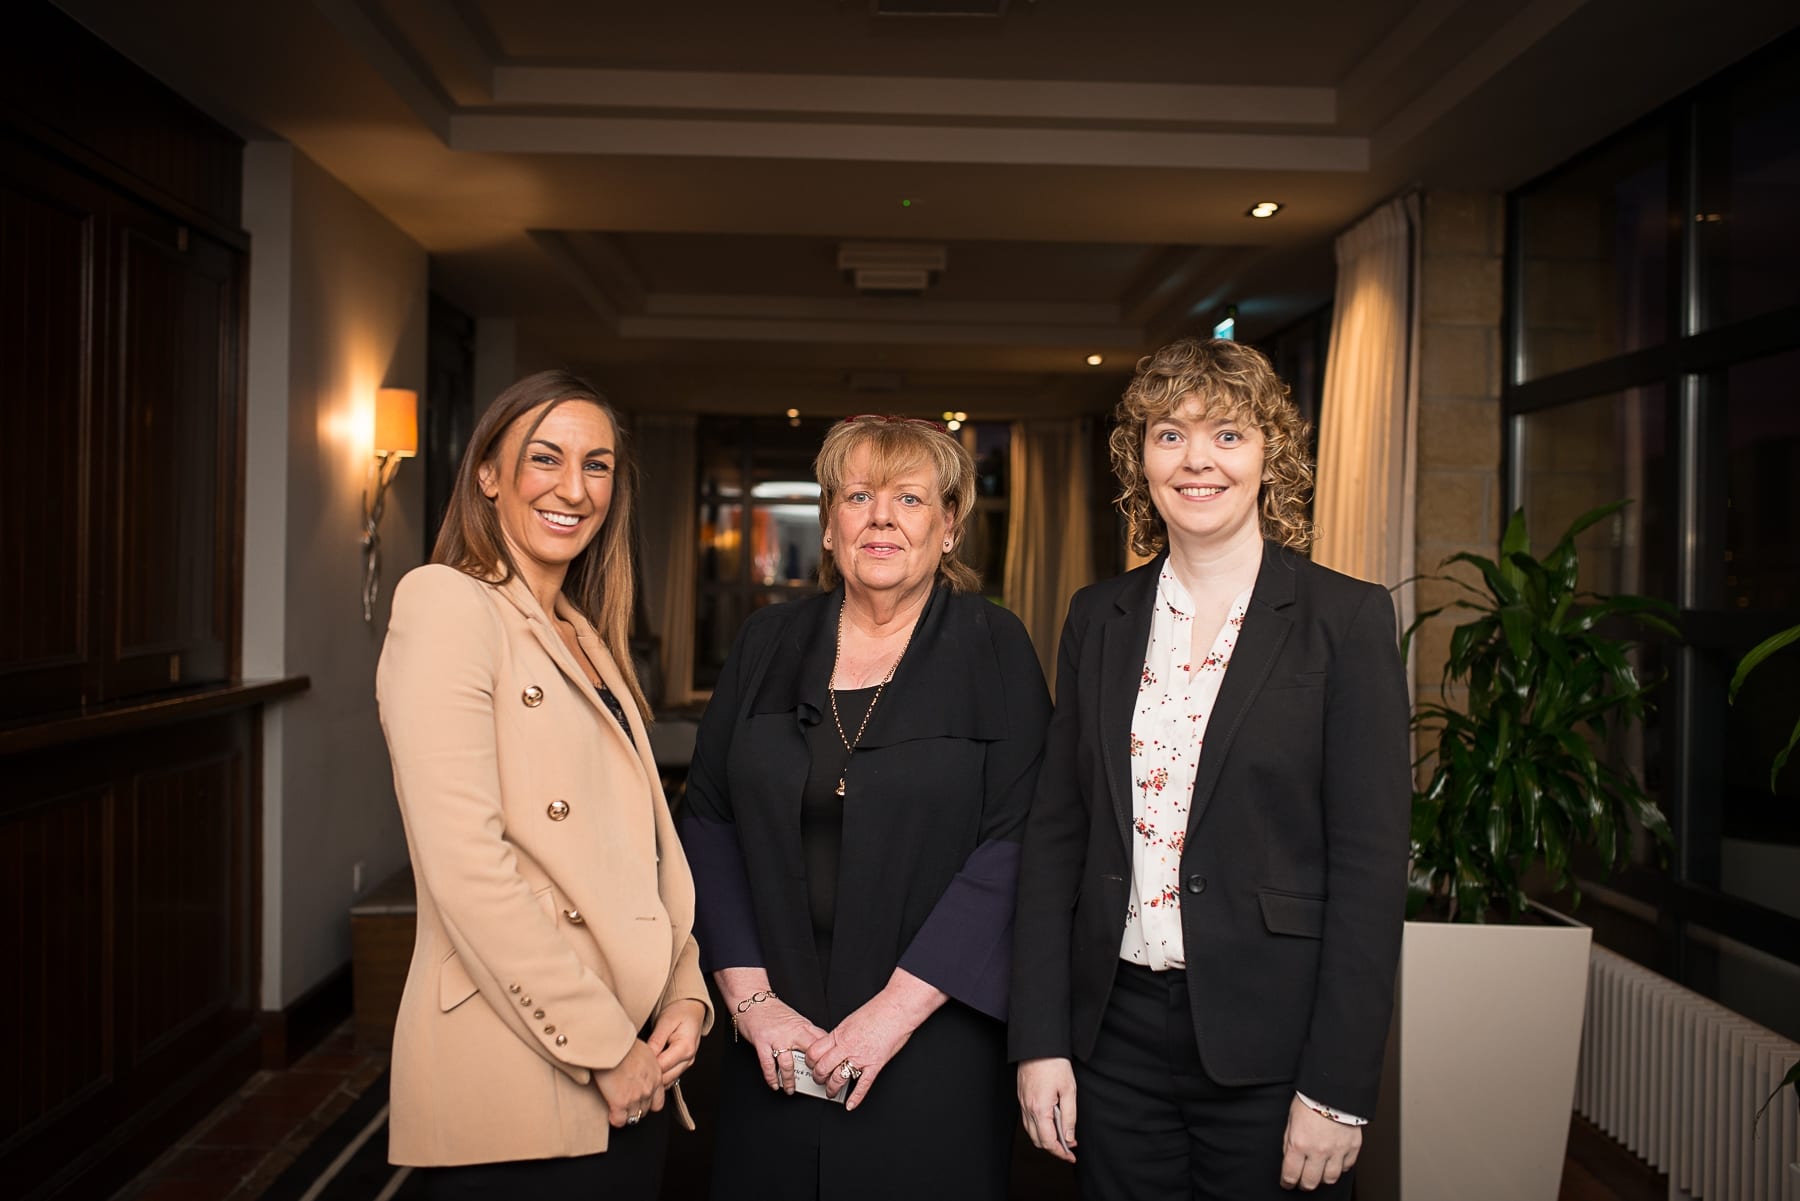 Economic Breakfast Briefing; European and Local Economic Outlook In association with the Limerick Post which took place in the Castletroy Park Hotel on Monday 11th Feb 2019:  From left to right:Aoife Fitzgerald- Northern Trust, Joan Fahy - Limerick Post, Yvonne O’Keffee - Northern Trust. 
Image by Morning Star Photography